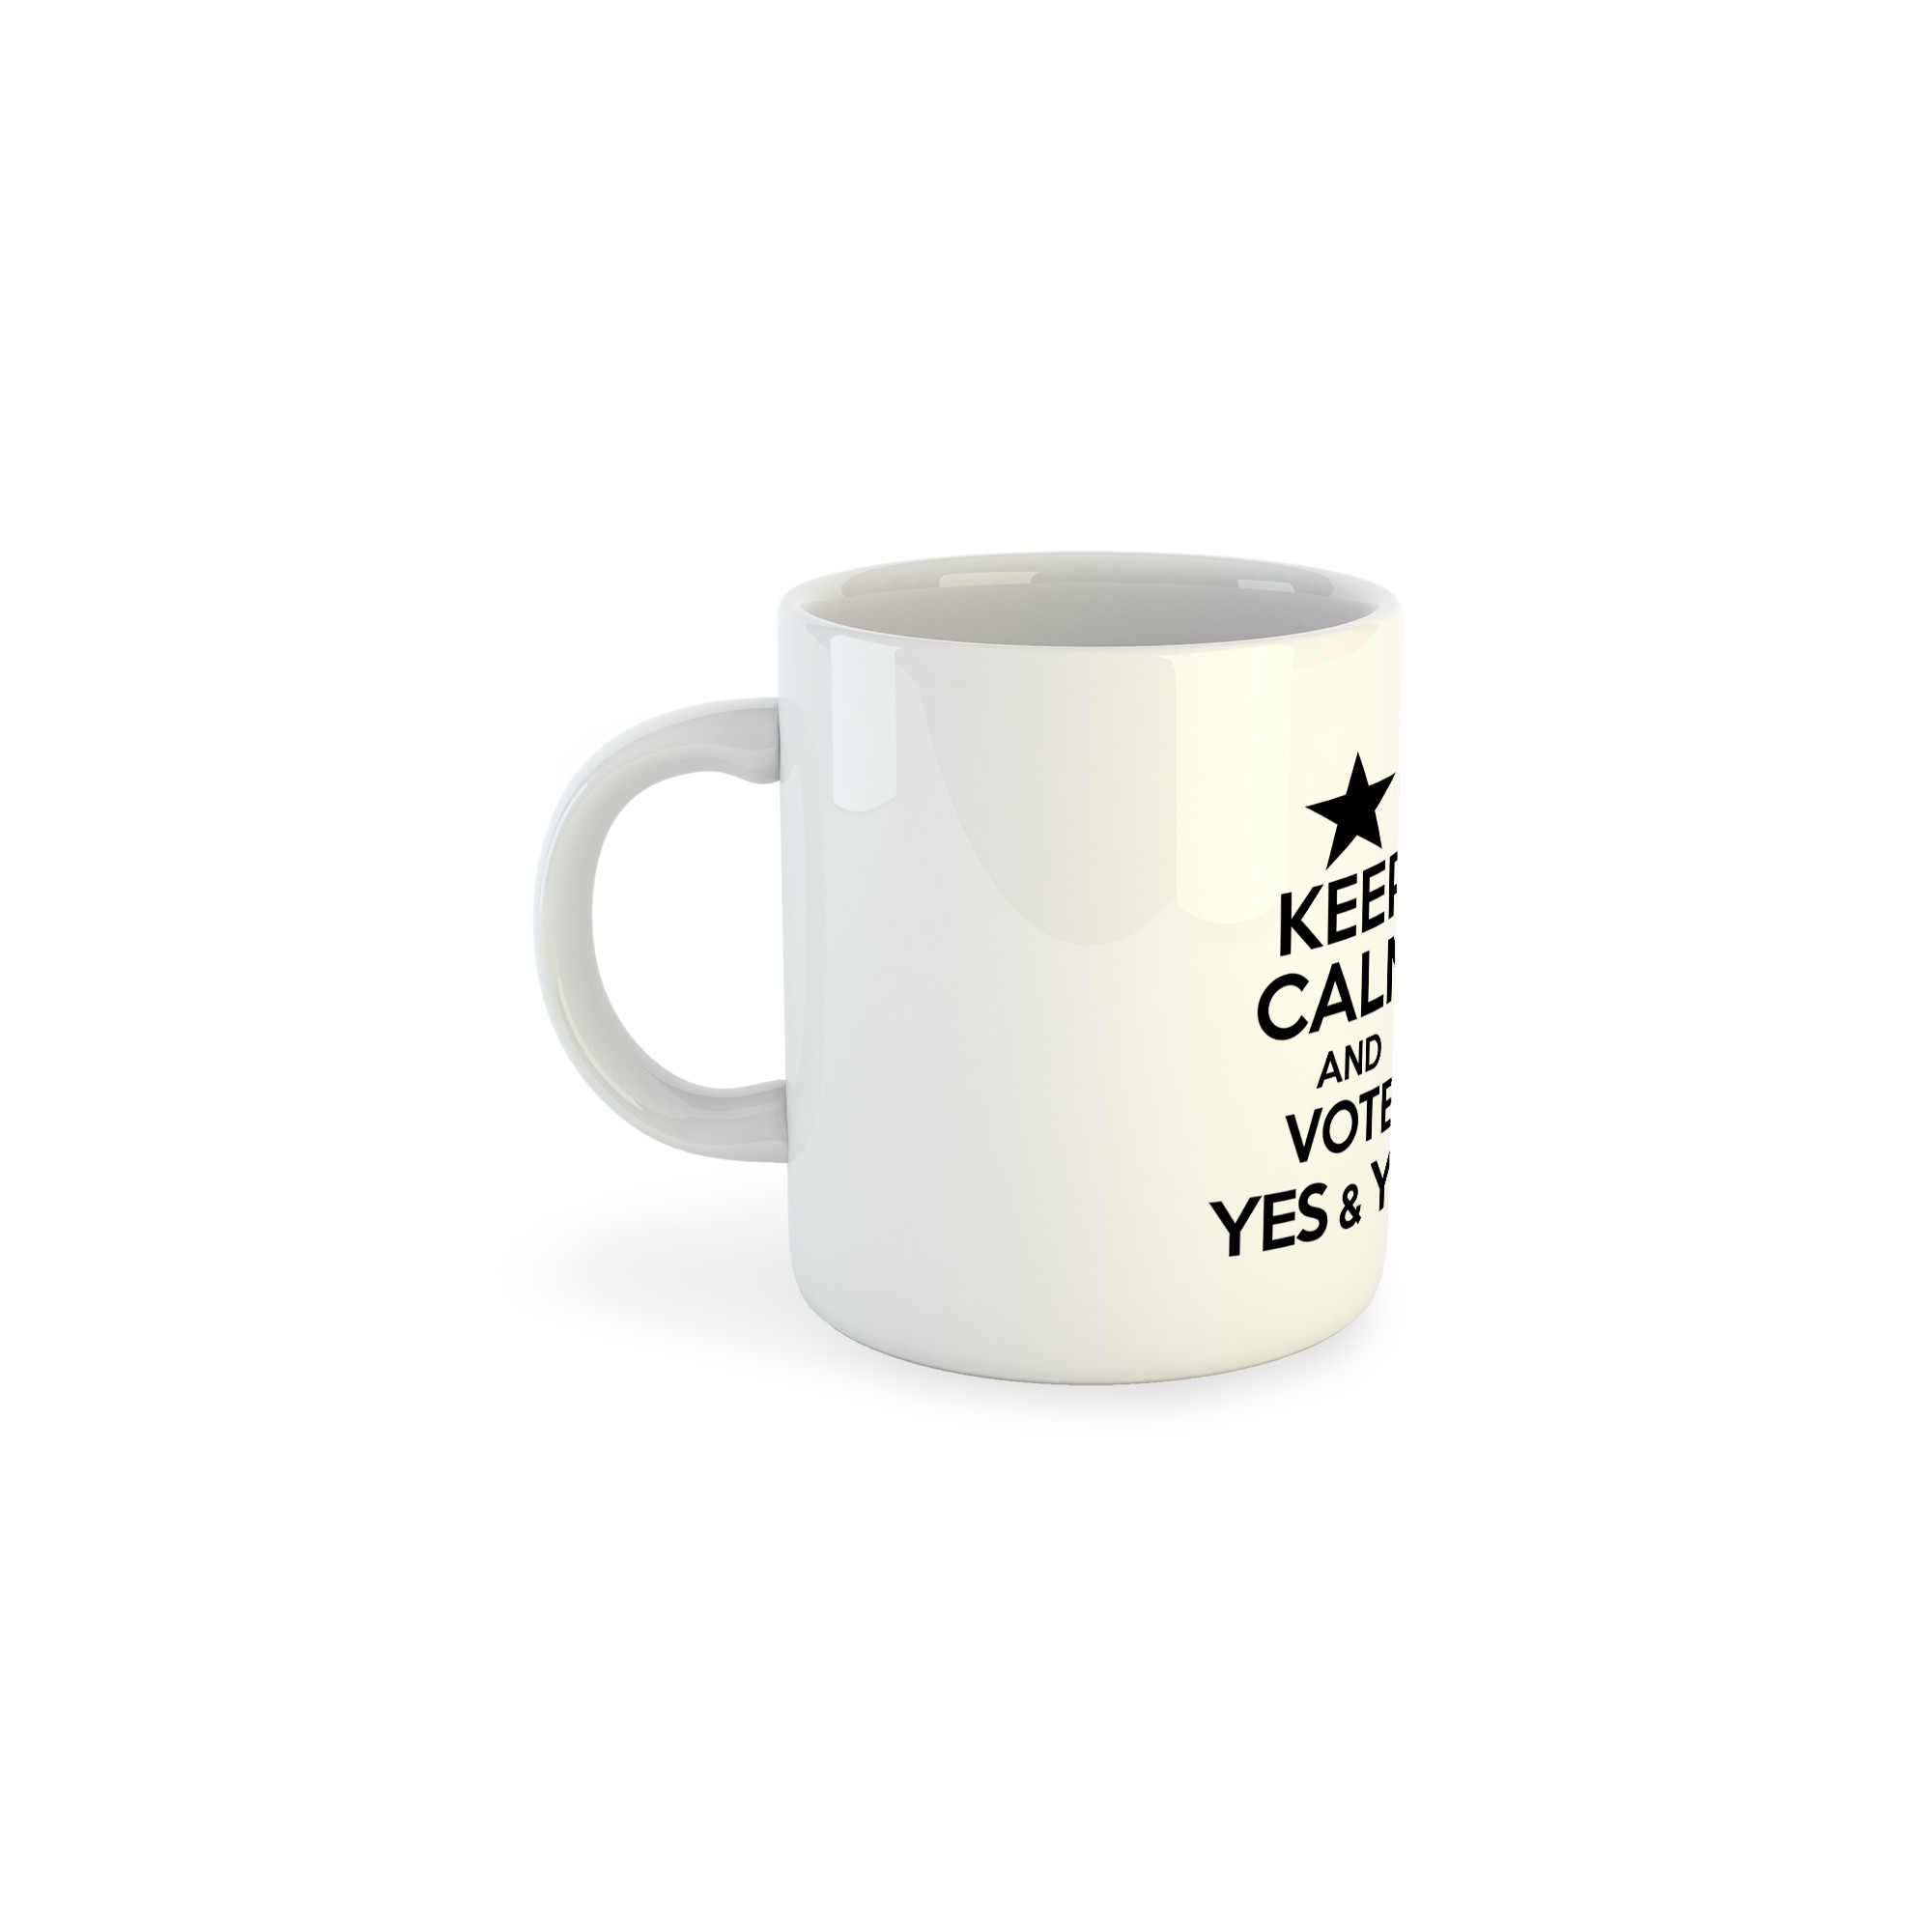 Tasse 325 ml Catalogne Keep Calm And Vote Yes